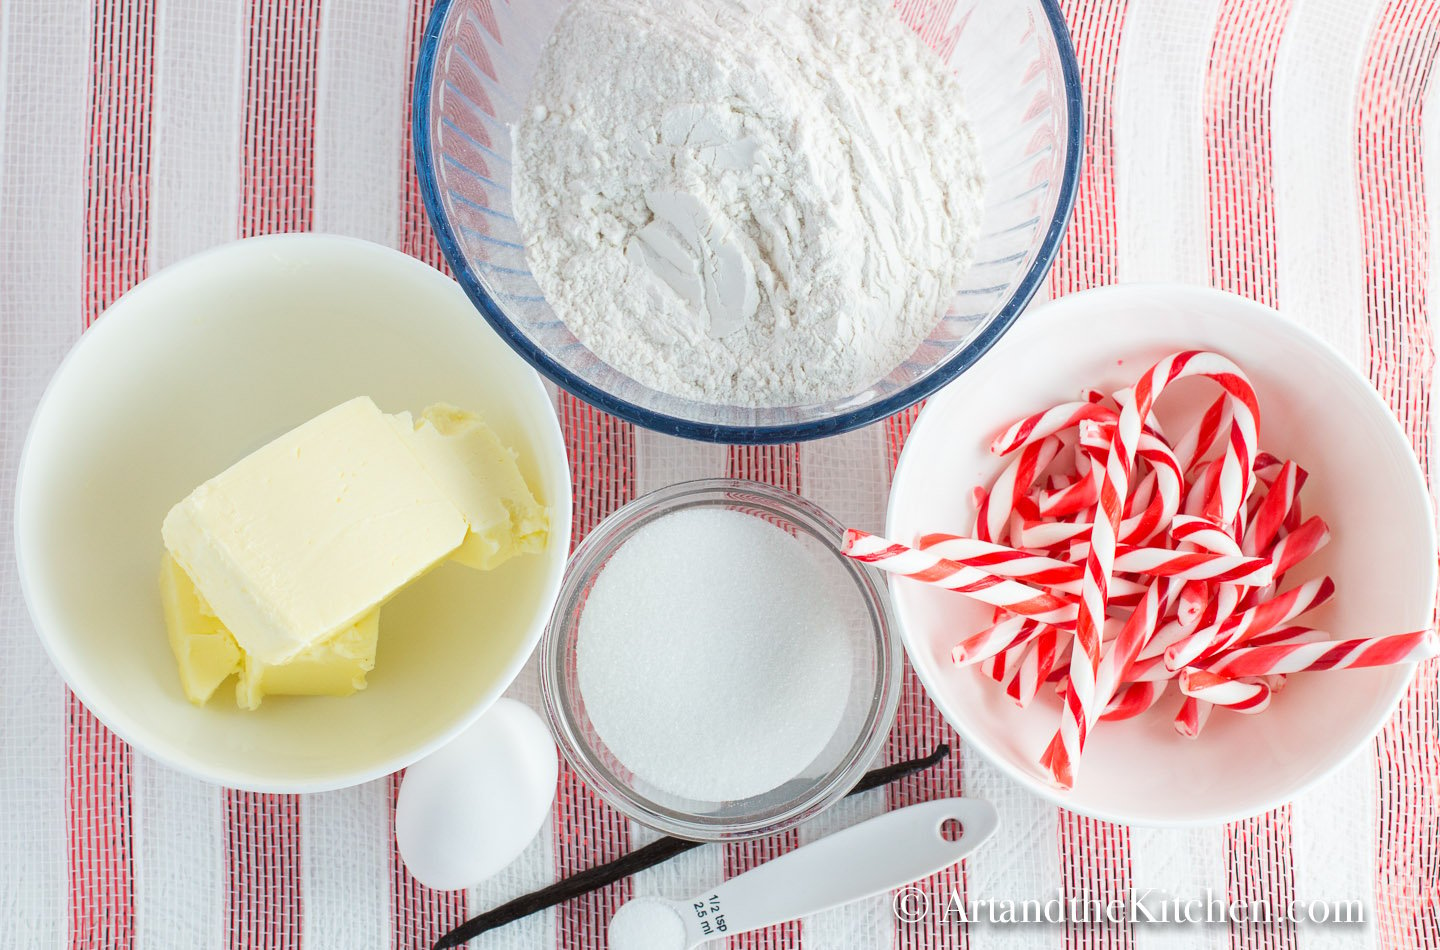 Bowls filled with ingredients for making candy cane sugar cookies.